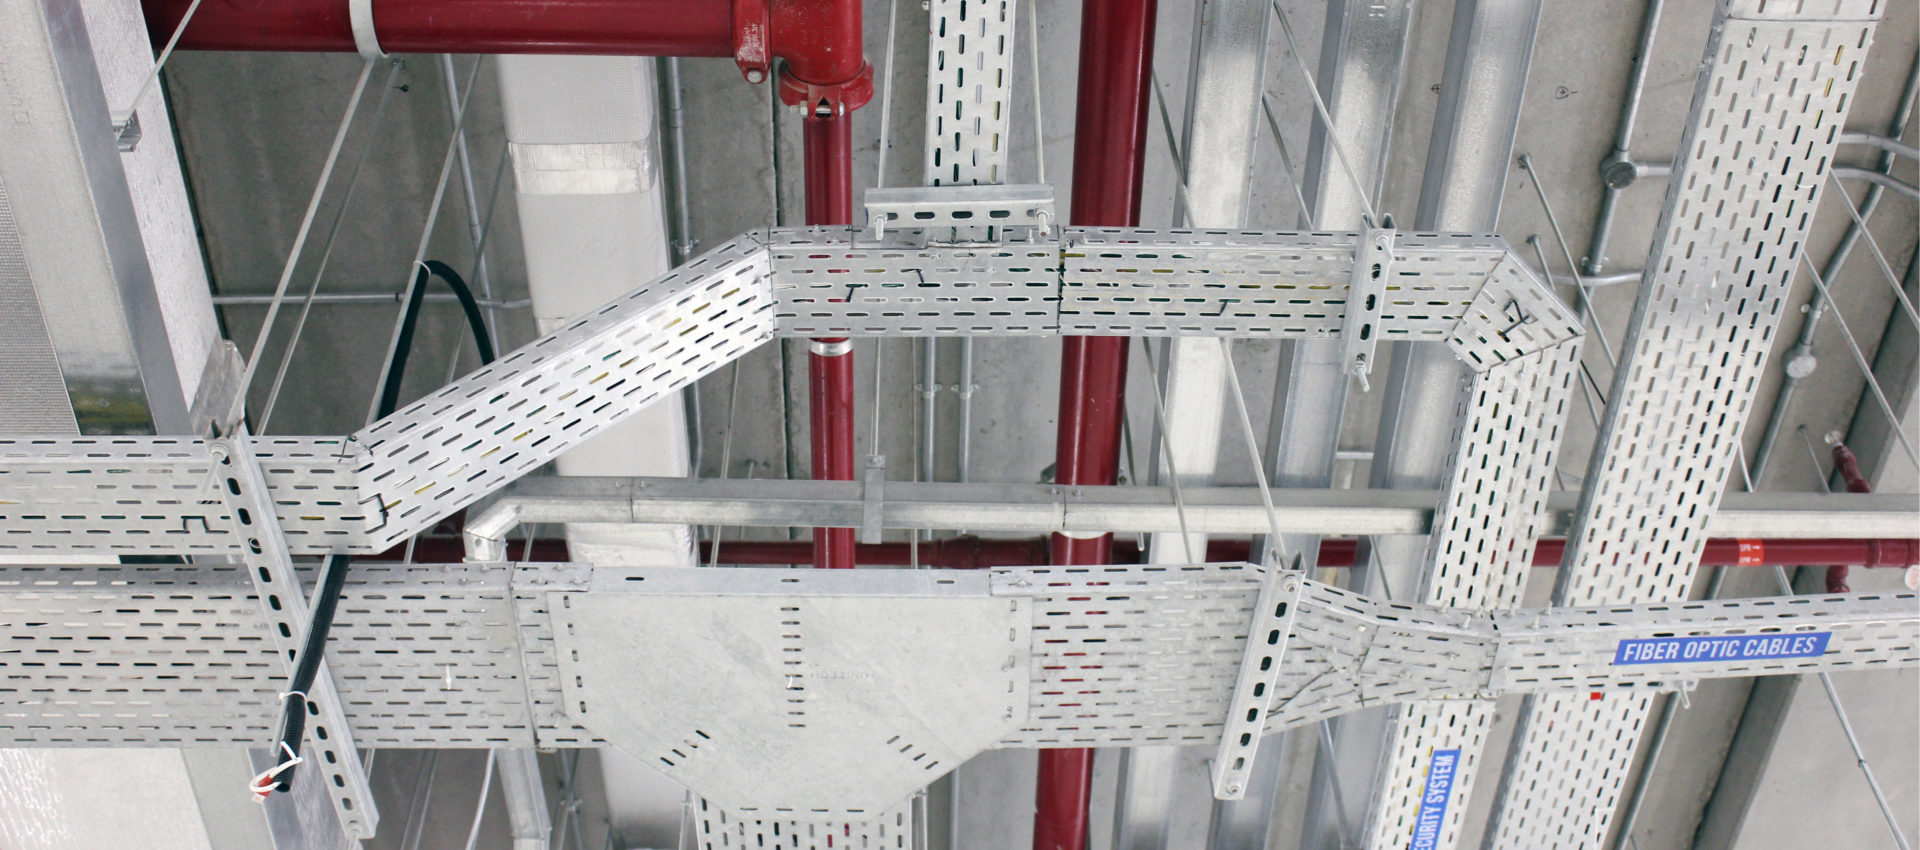 )ver-engineered Rod Suspended Cable Tray